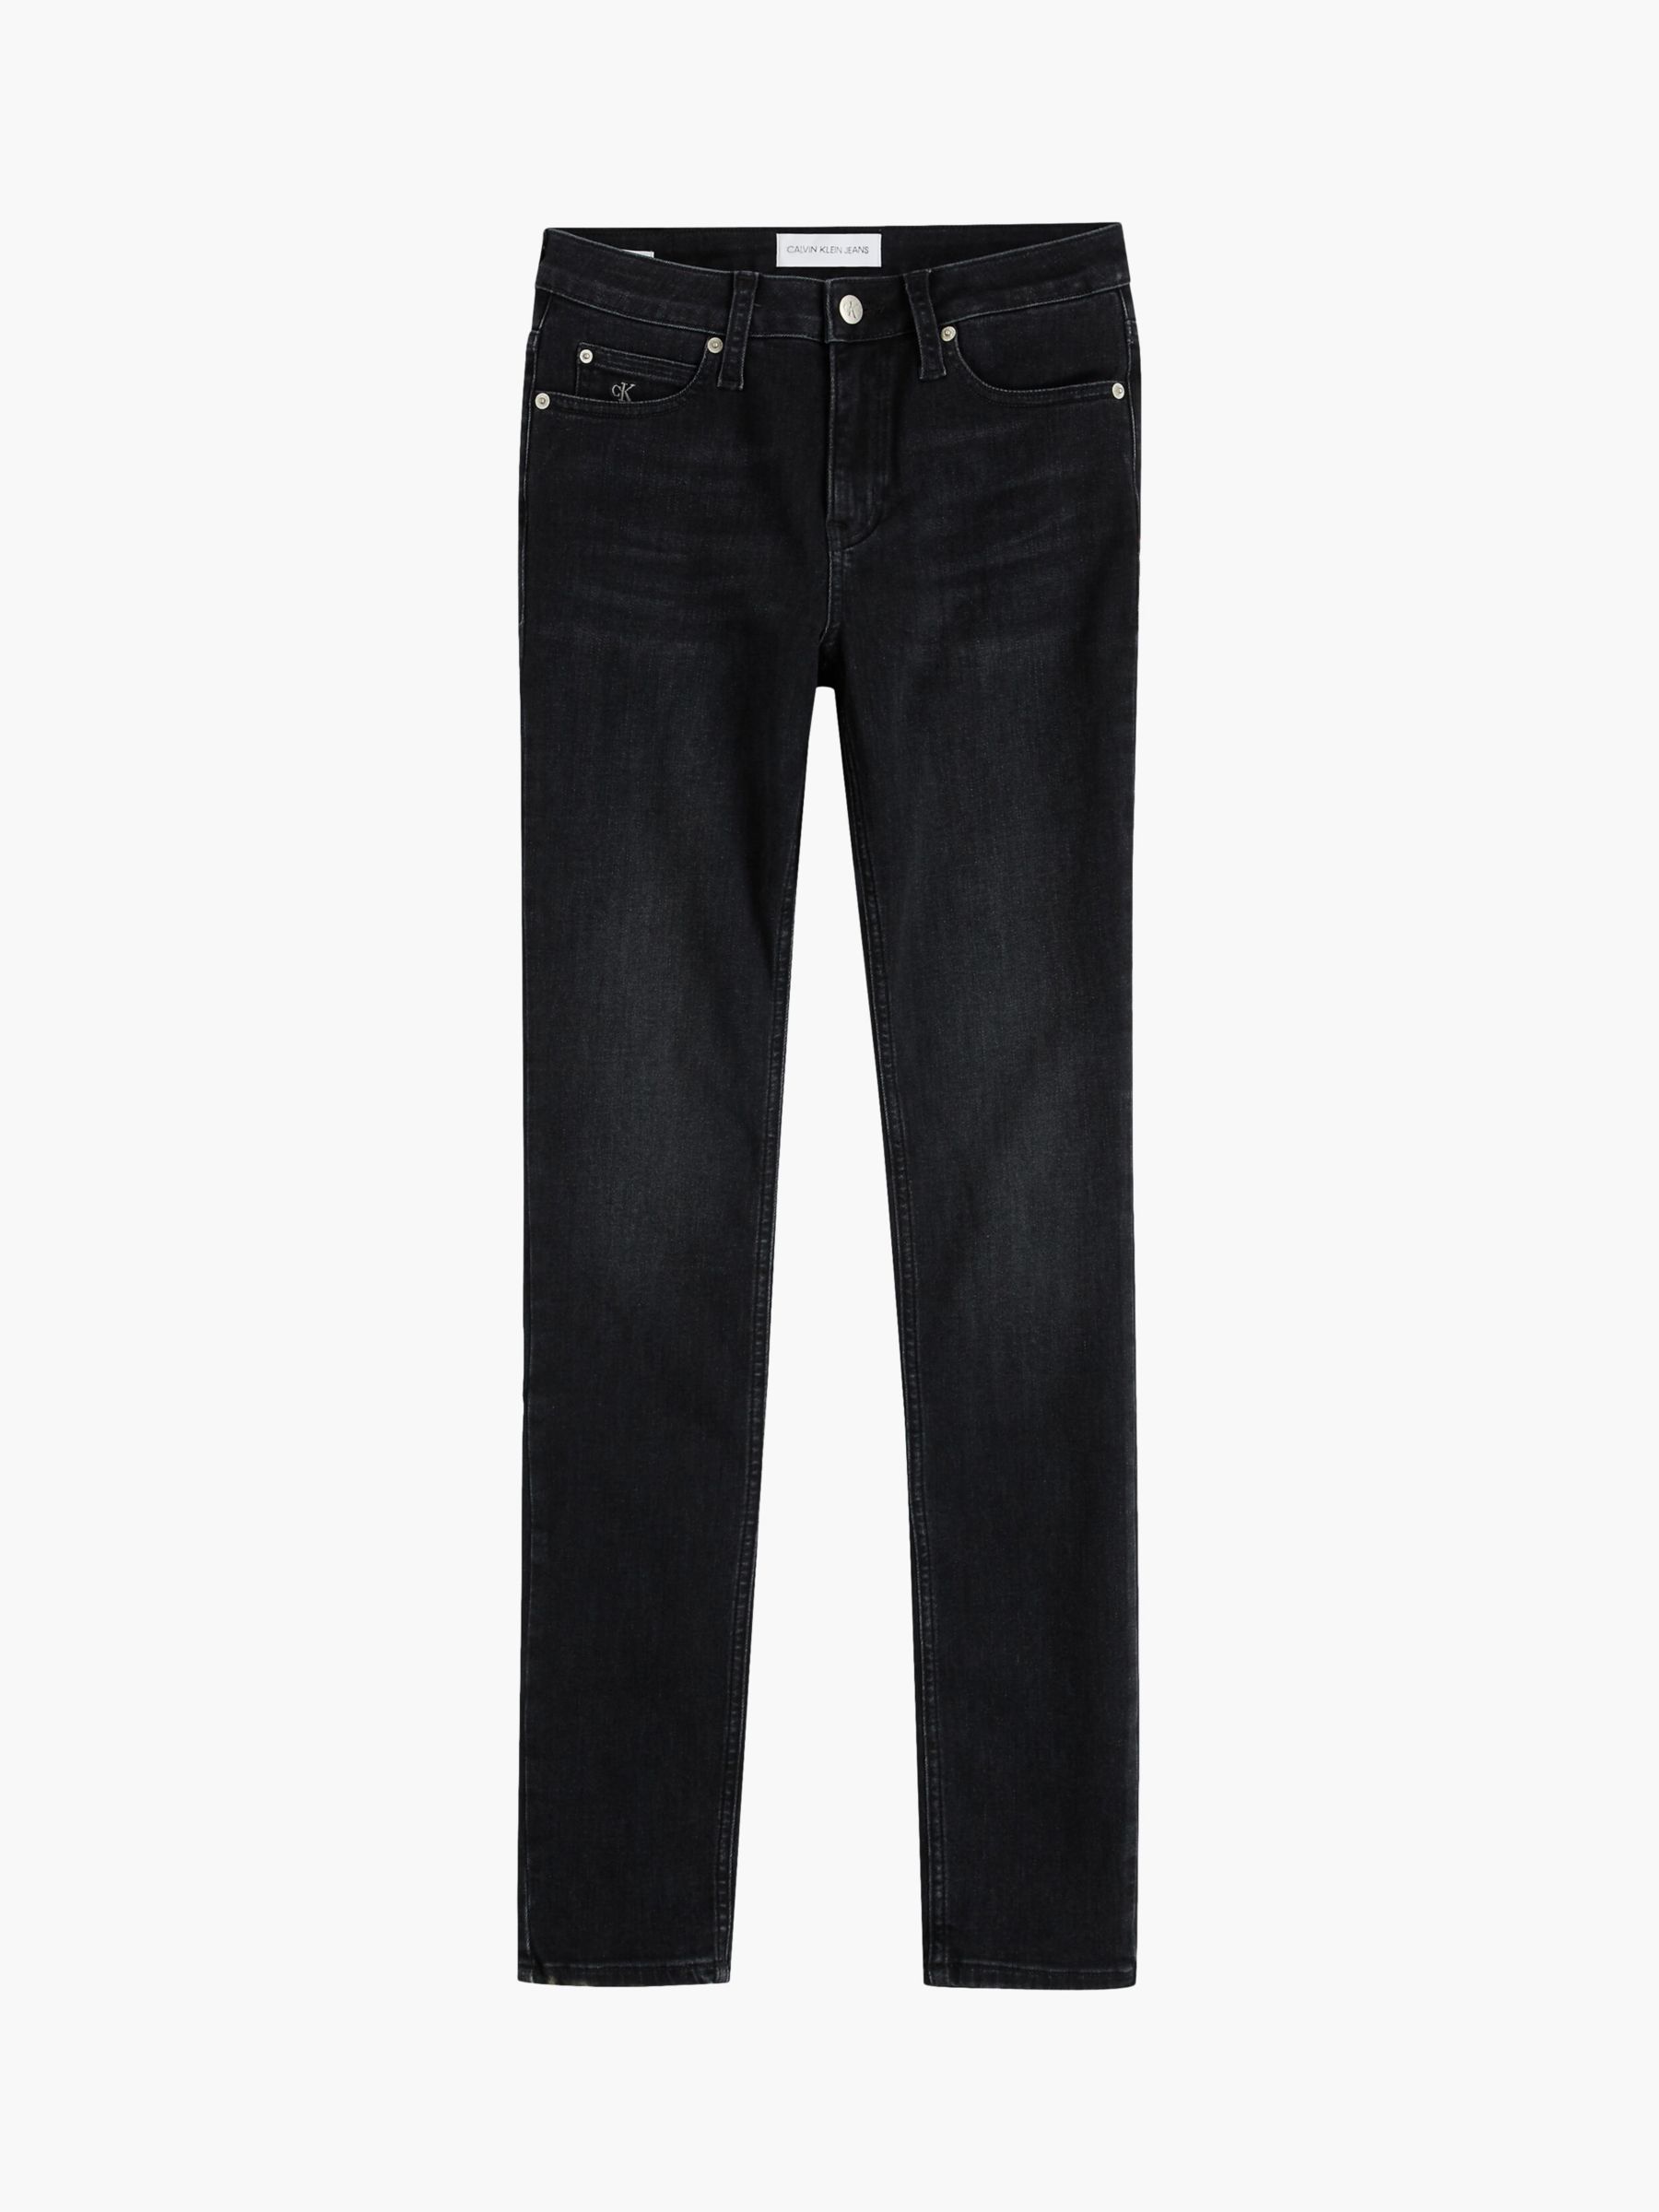 Calvin Klein Mid Rise Skinny Jeans, Washed Black, 28S